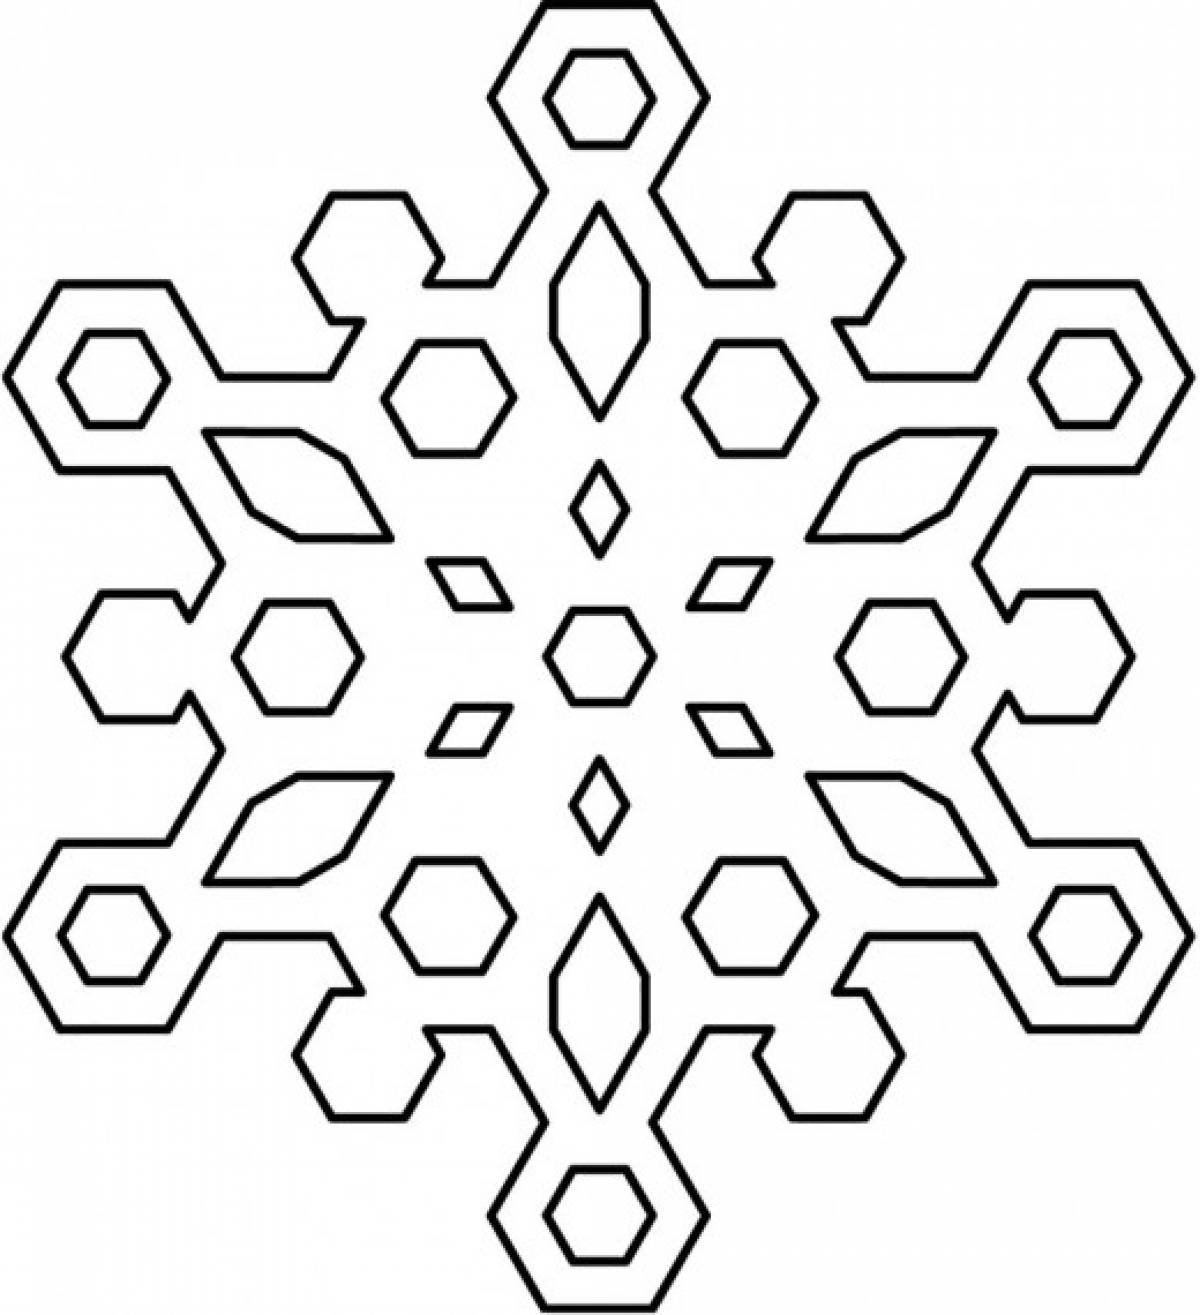 Snowflake in the form of honeycombs